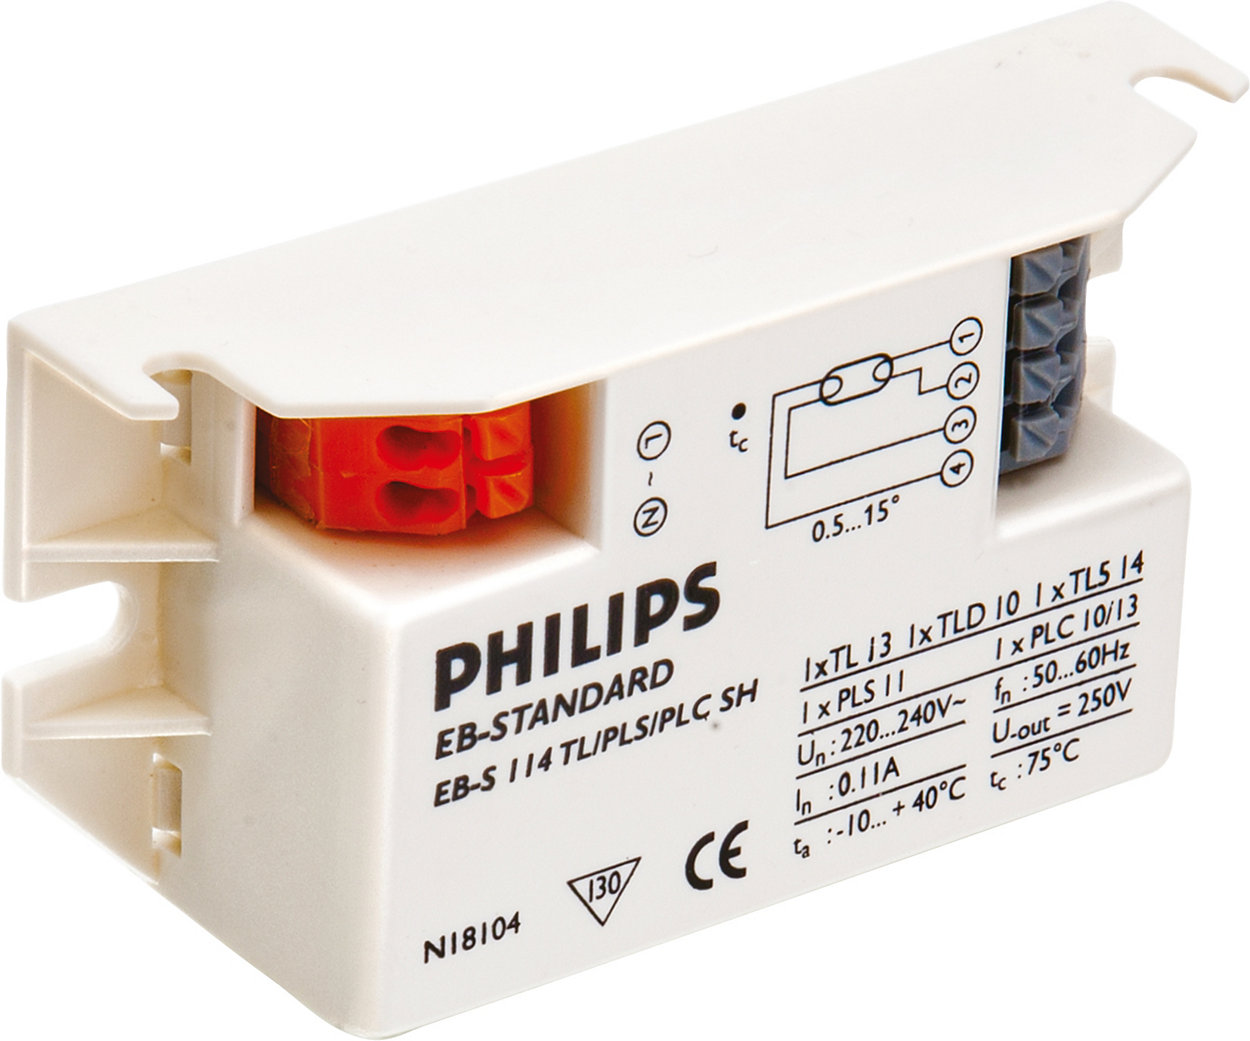 Micropower electronic ballast for TL/PL-S/-T/-C lamps